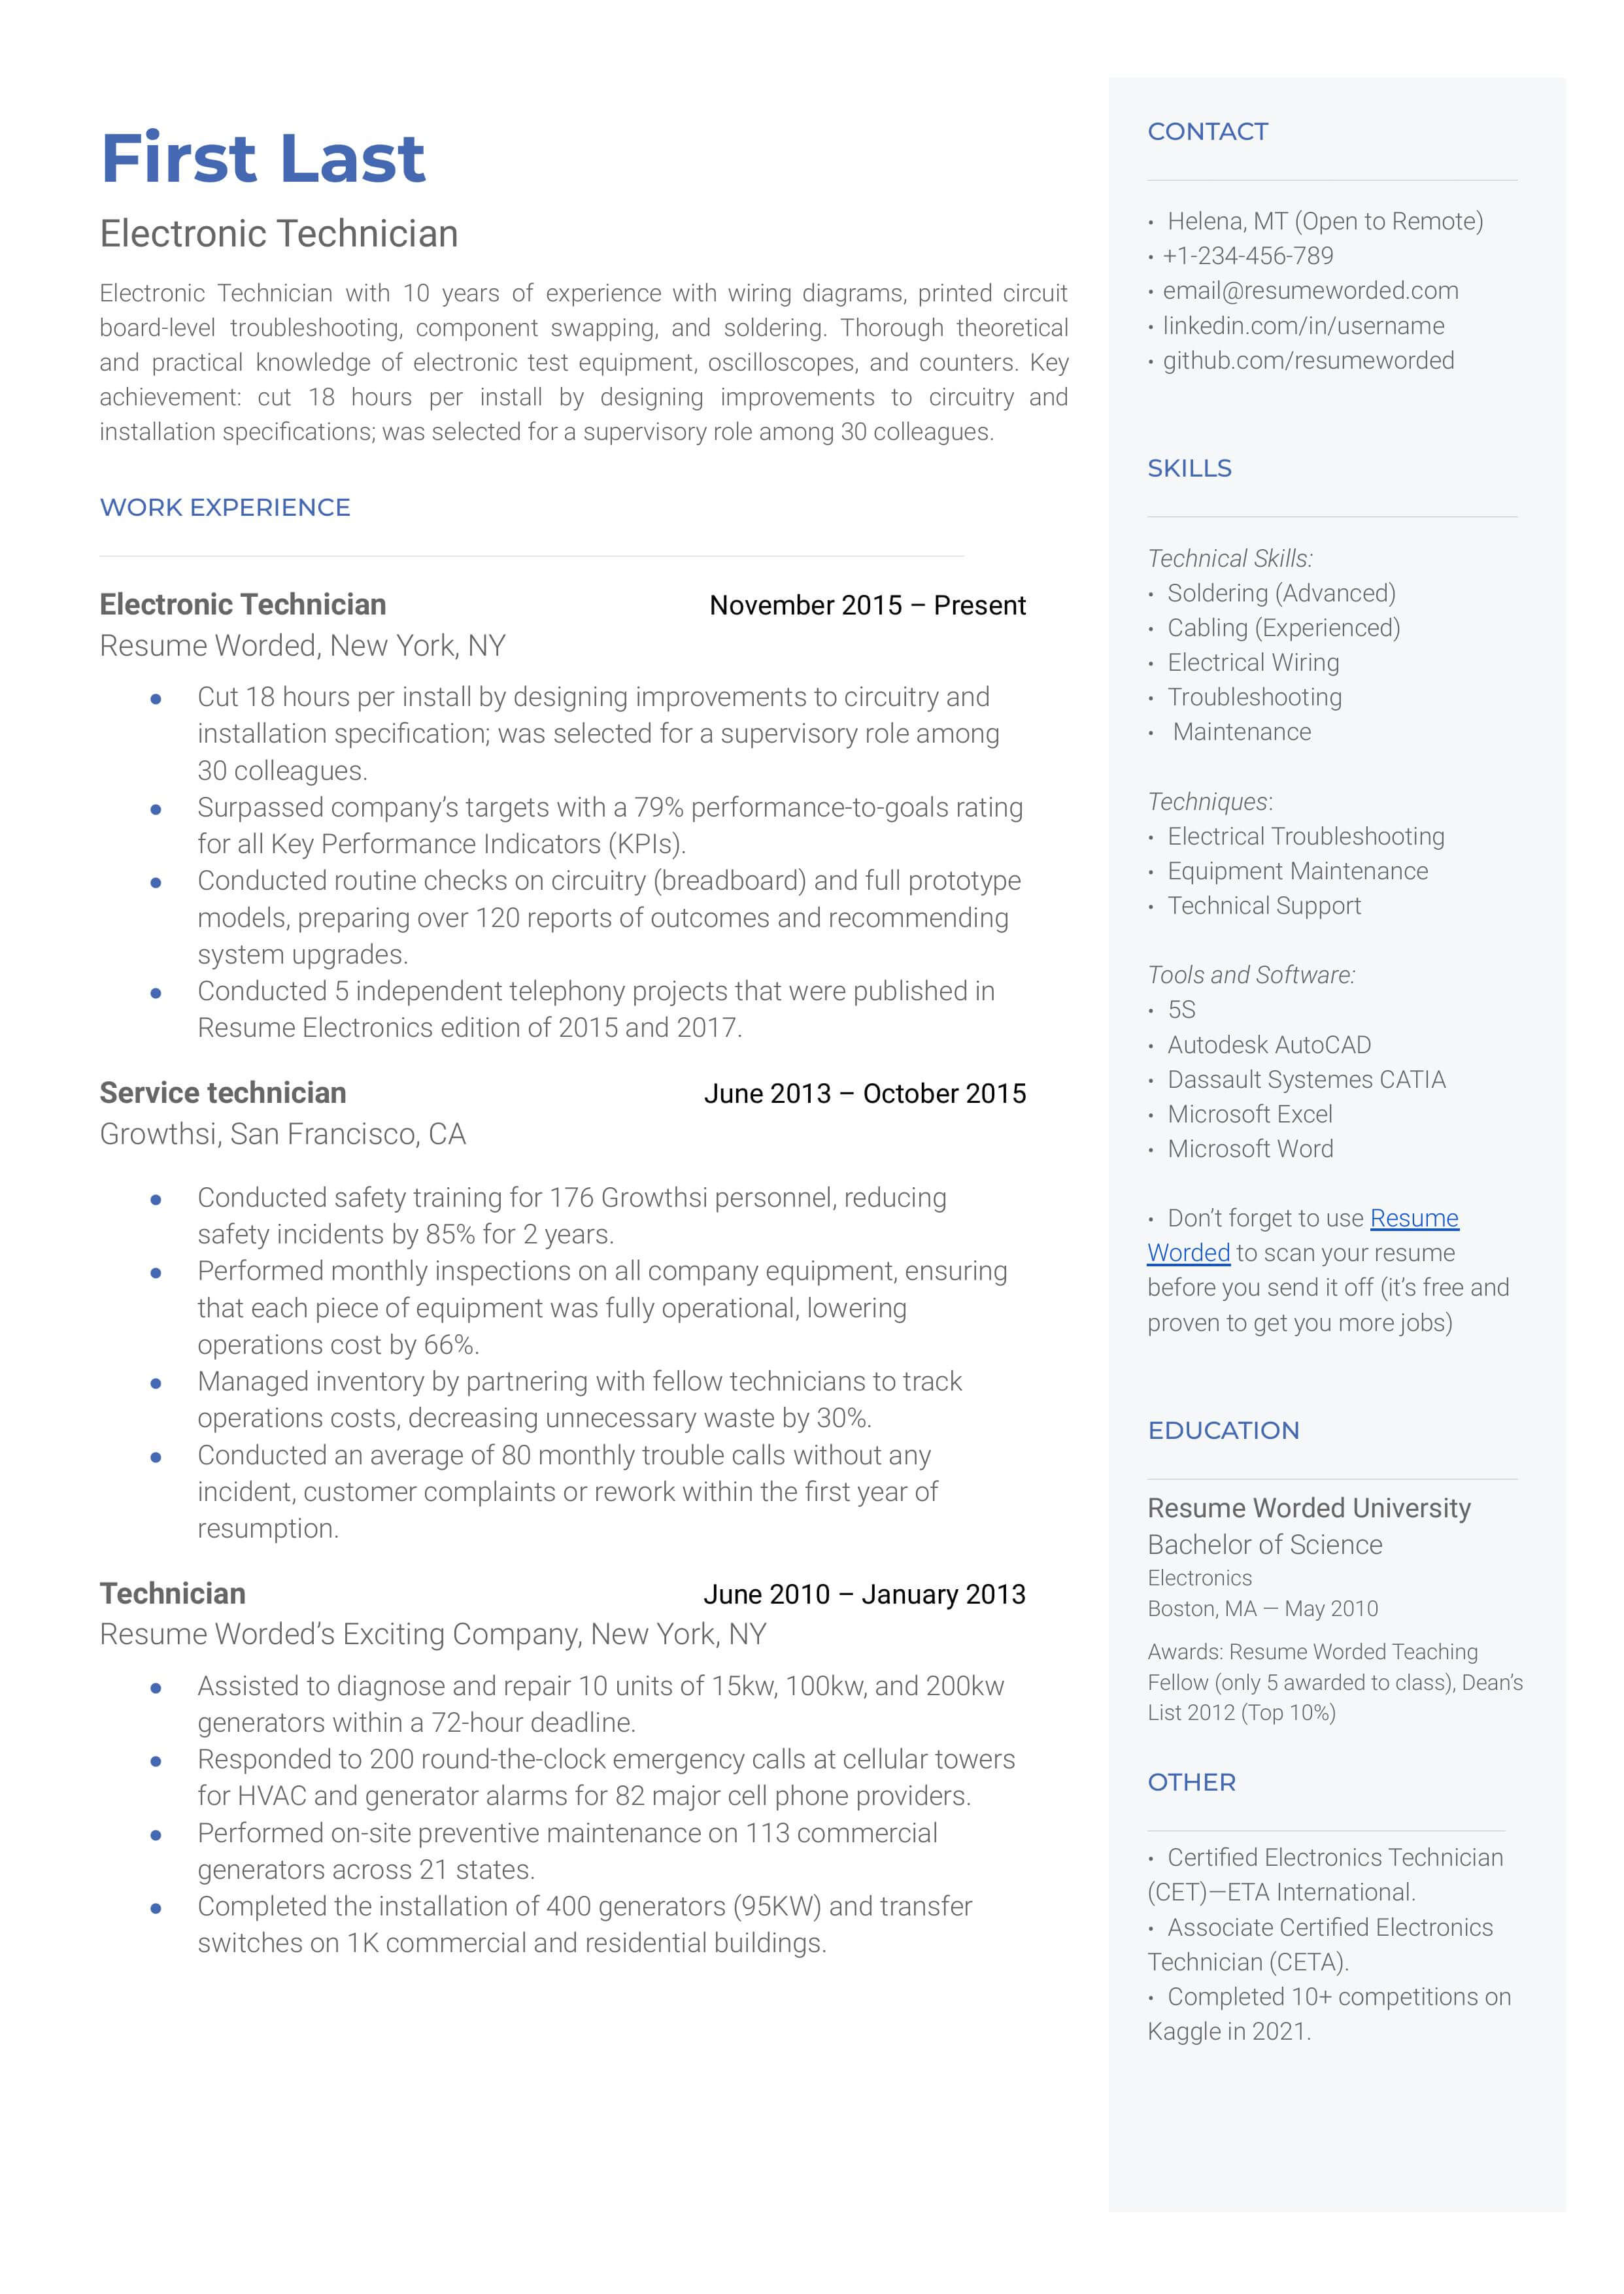 An electronic technician's CV showcasing practical experience and industry-specific certifications.